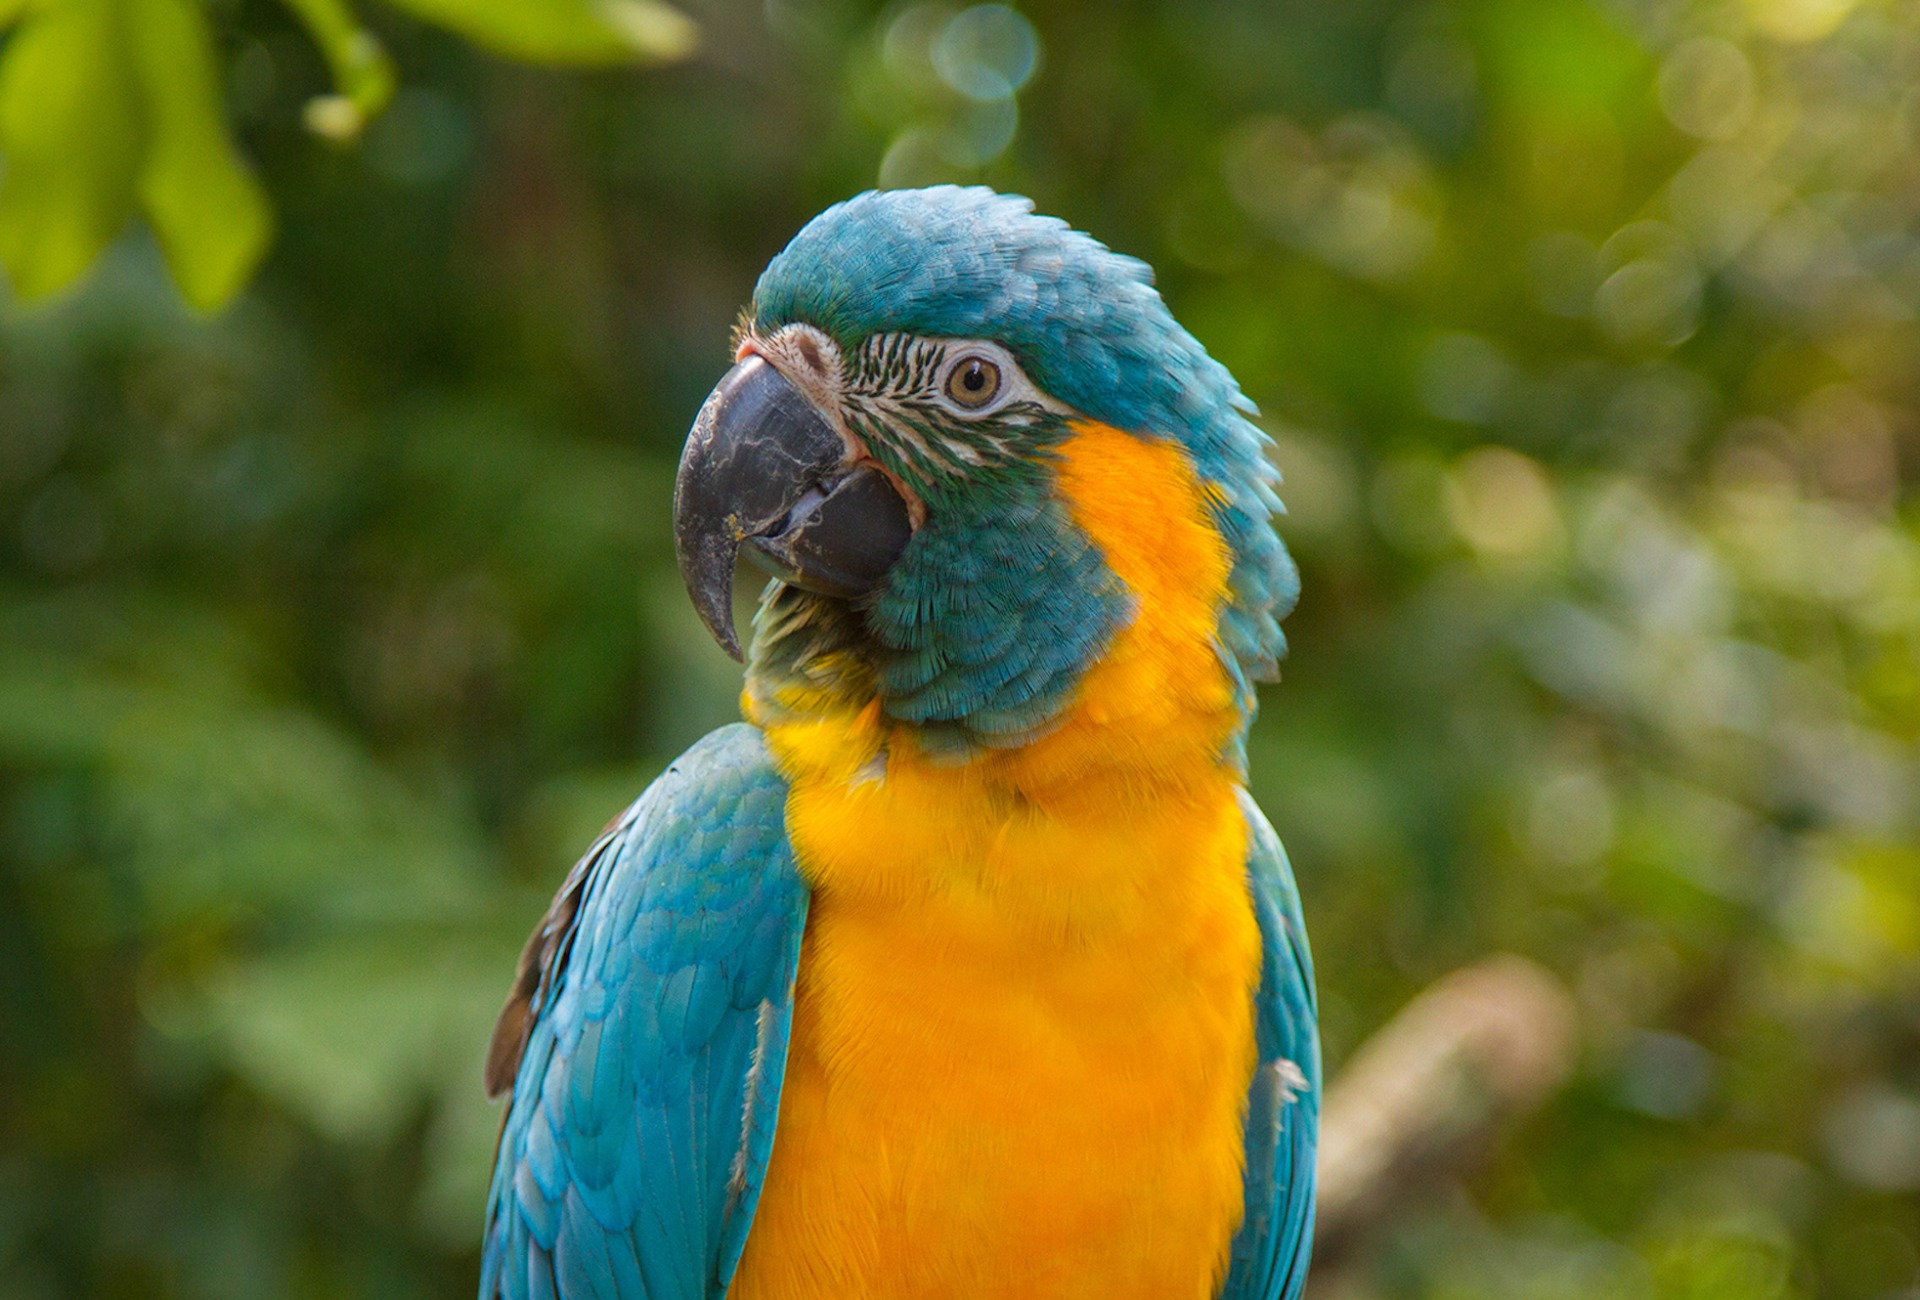 Close up of Blue-throated Macaw perched looking at the camera